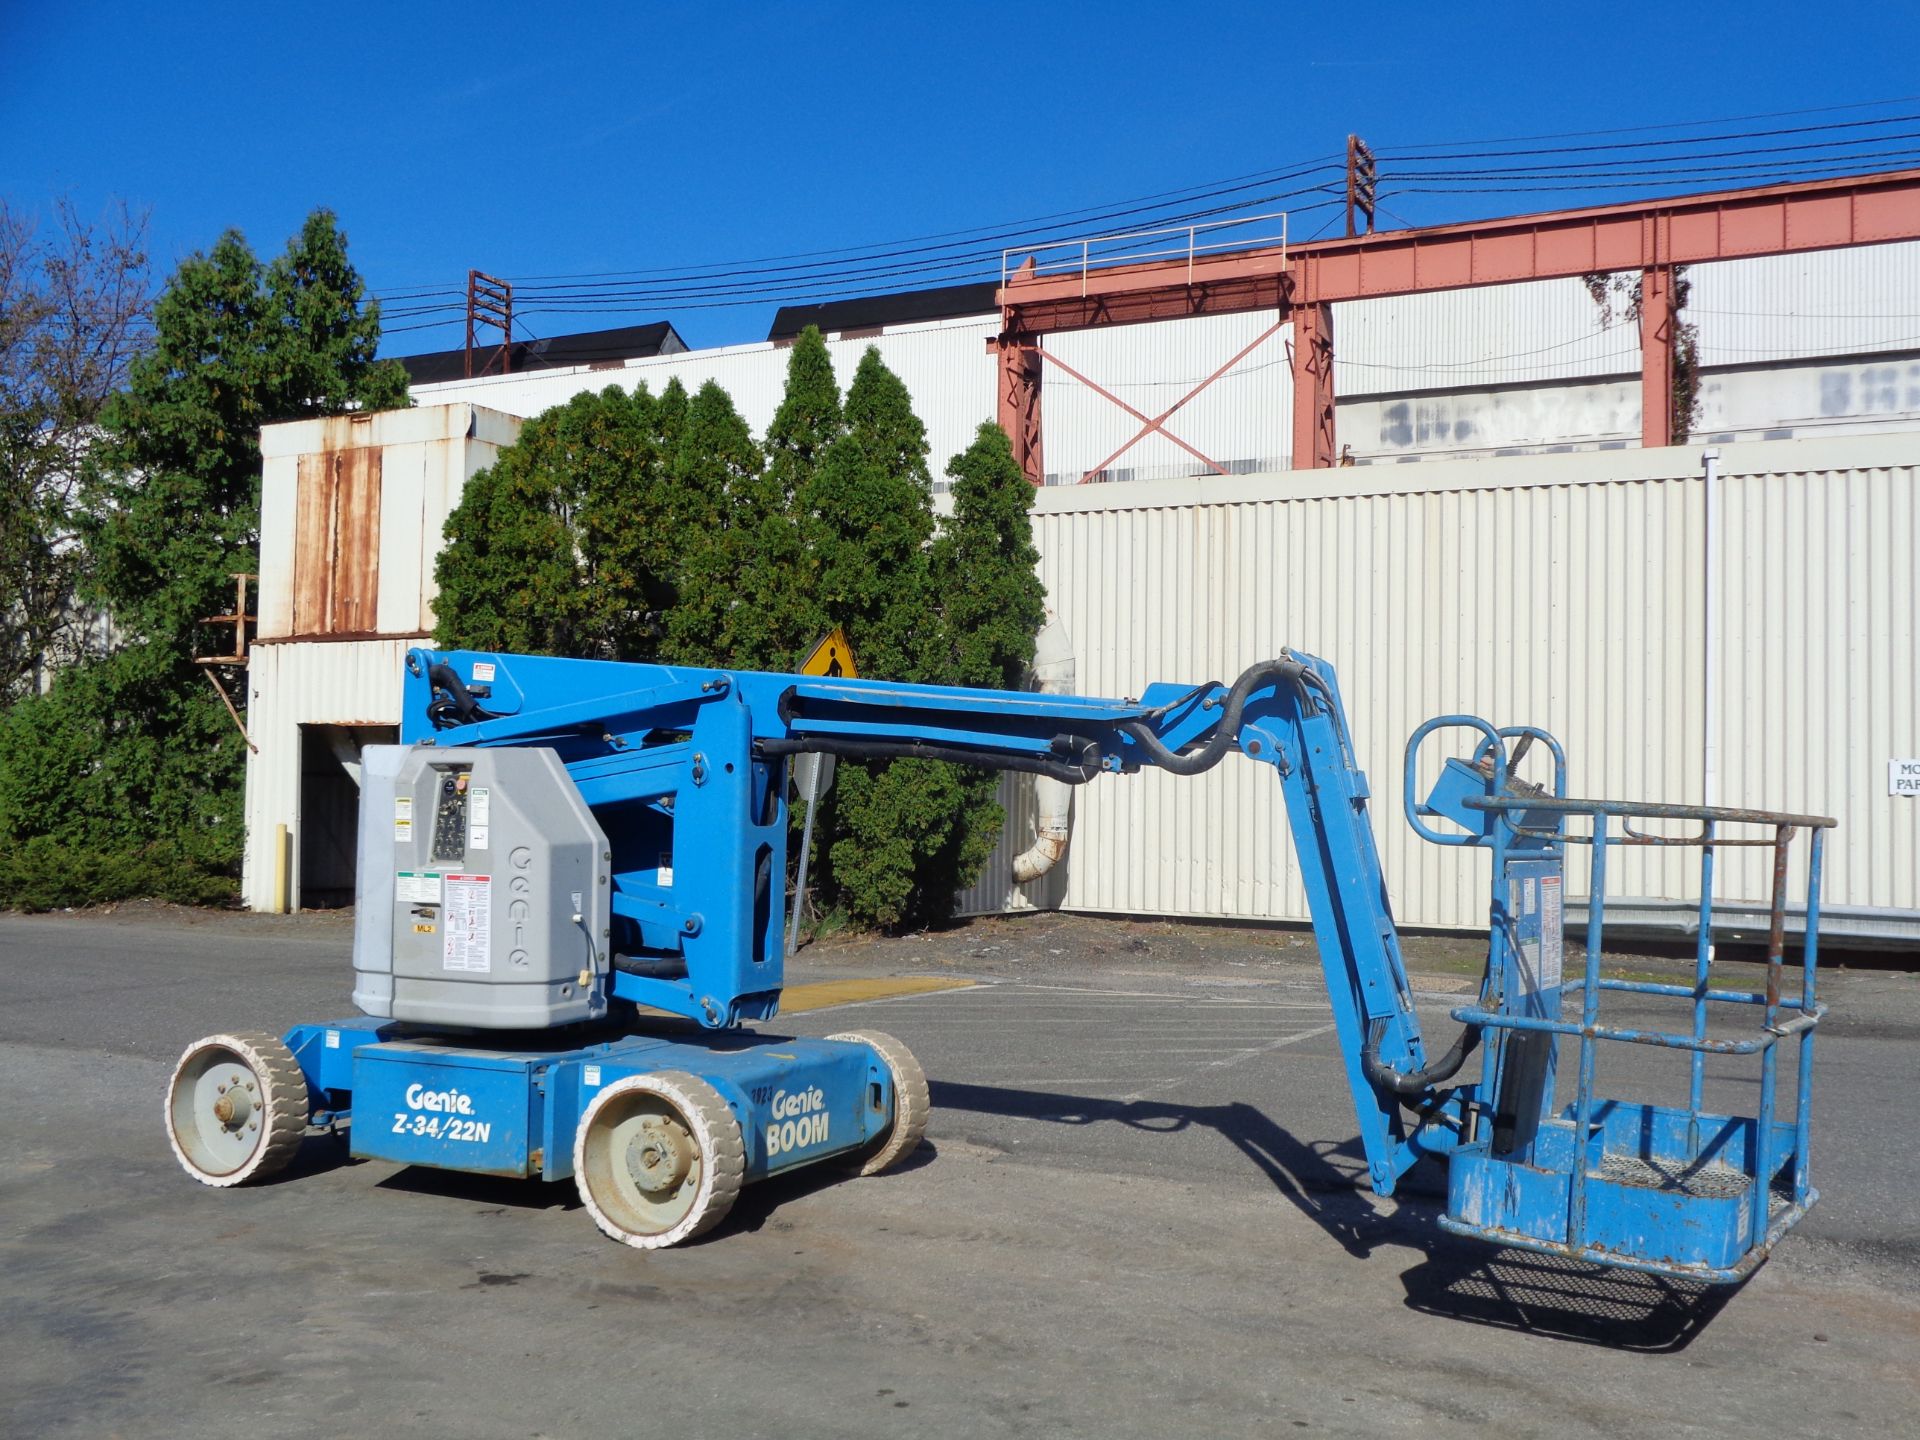 2011 Genie Z34/22N Electric 34ft Boom Lift - Image 2 of 24